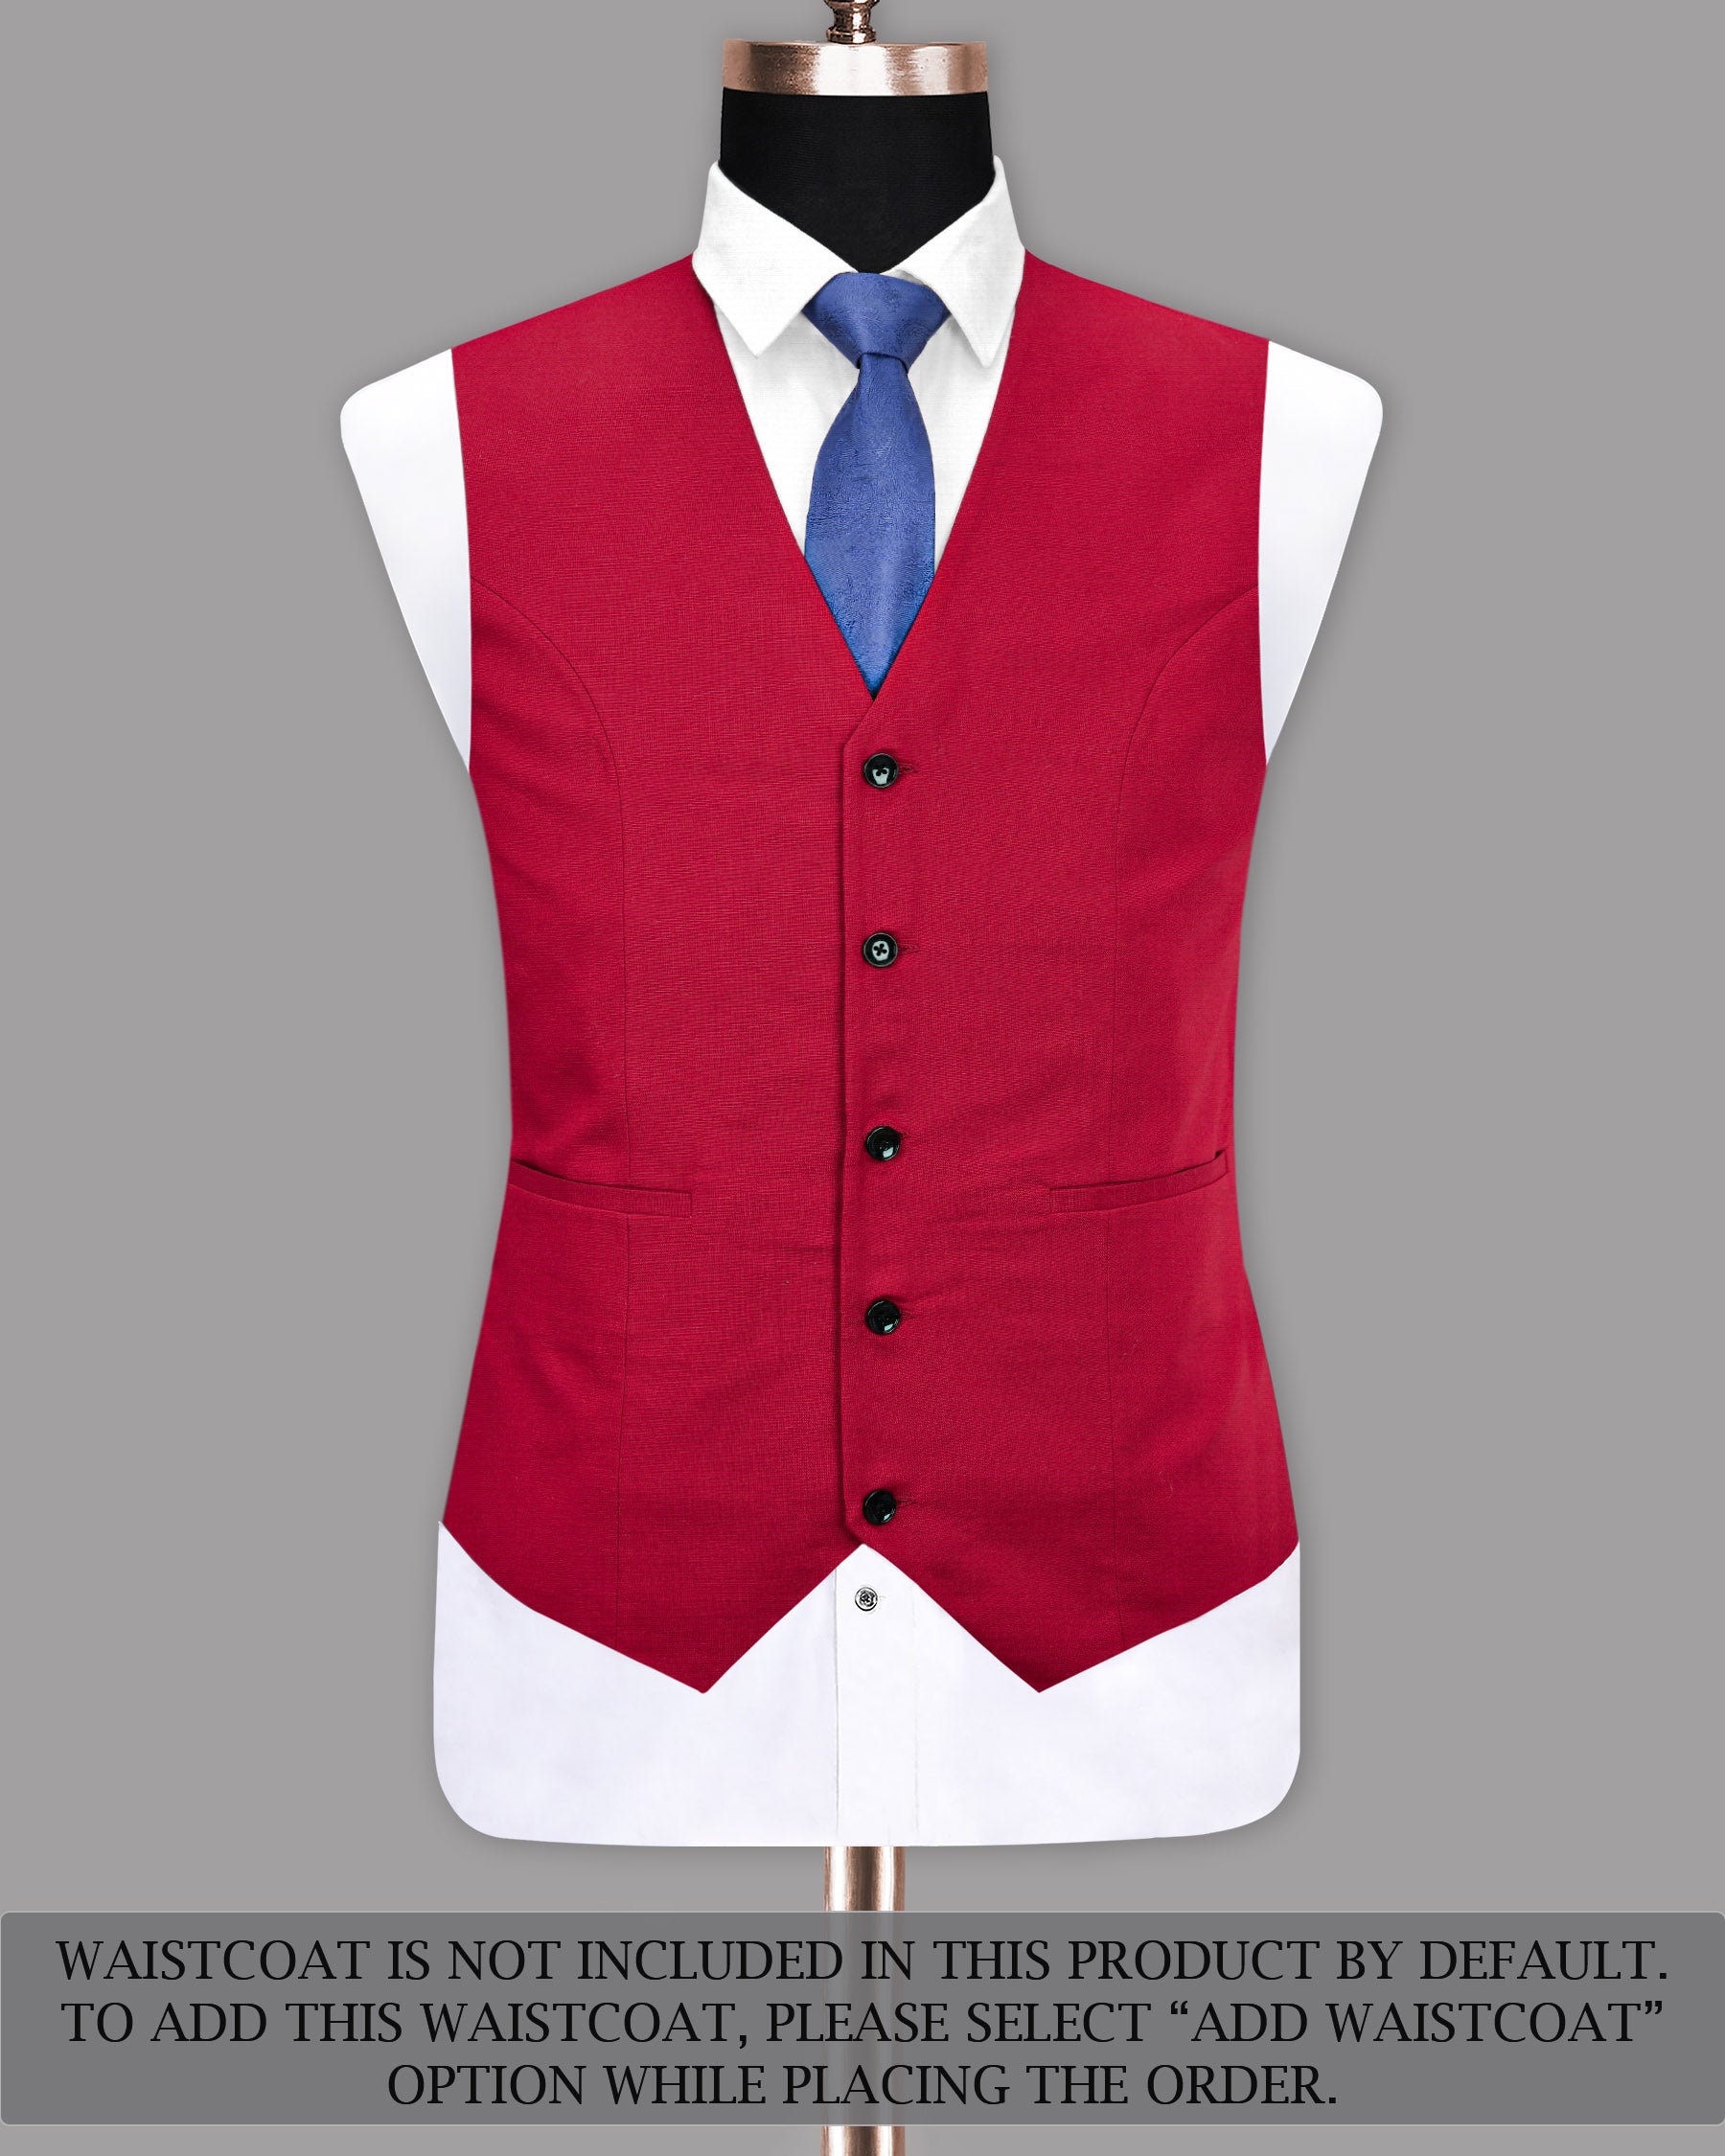 Shiraz Red Luxurious Linen Double-Breasted Sports Suit